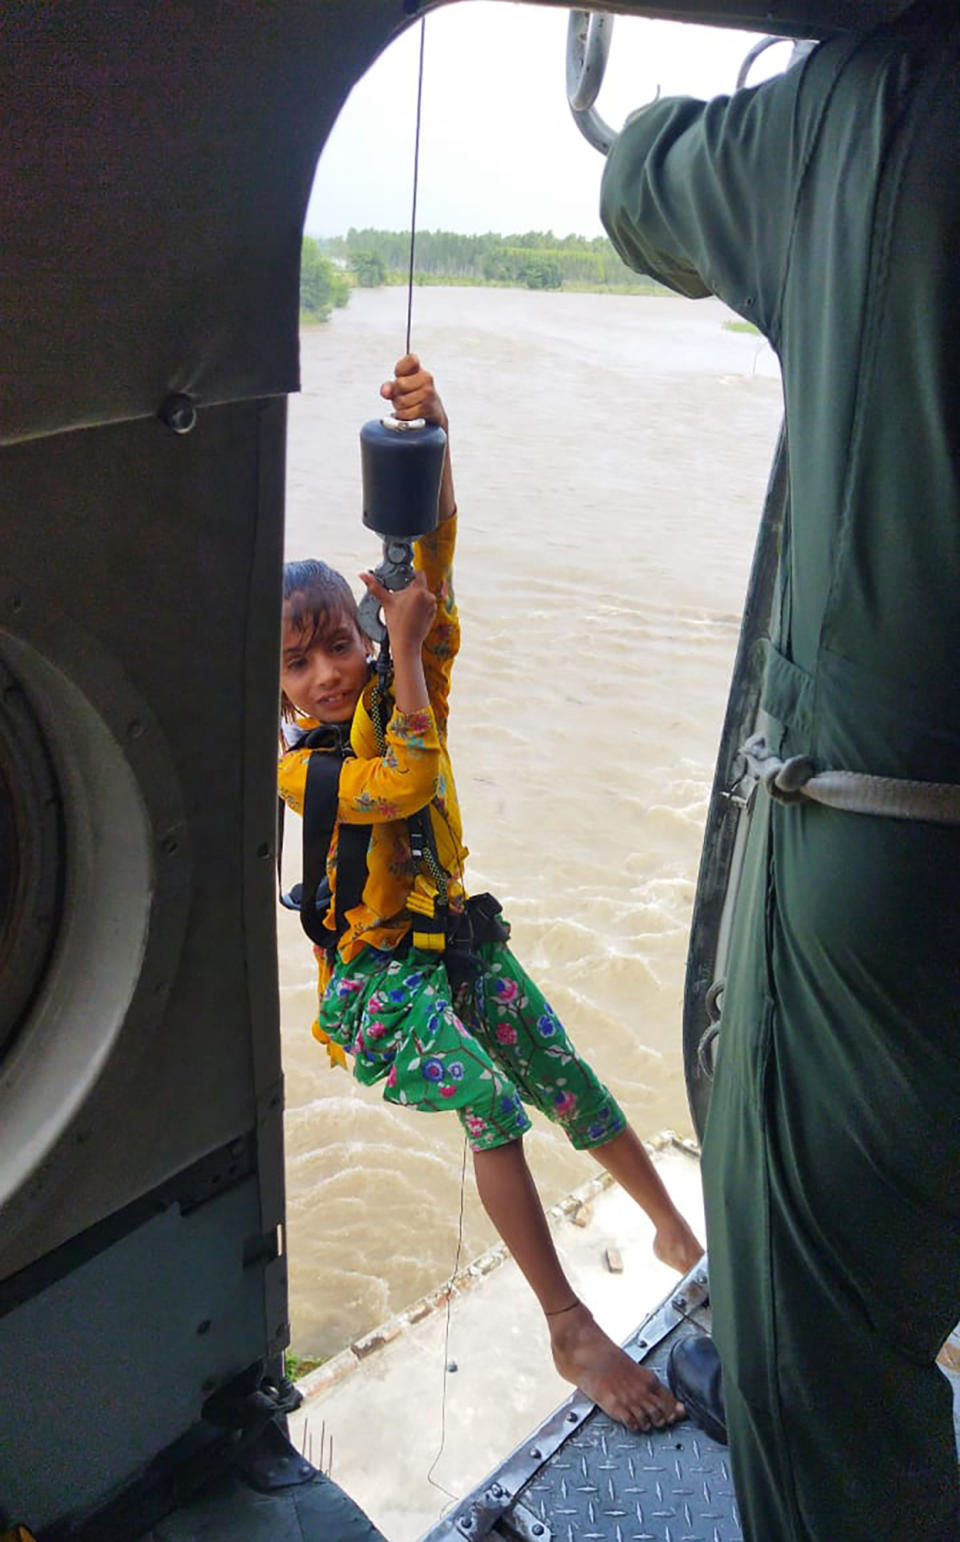 In this photo provided by the Indian air force, a child is airlifted from a flood-affected area in Himachal Pradesh state, India, August 2023. Days of relentless rain in India’s Himalayan region have killed more than 70 people this week, a government official said Thursday, as a heavy monsoon triggered landslides and flash floods that have submerged roads, washed away buildings and left residents scrambling for safety.(Indian Air Force via AP)